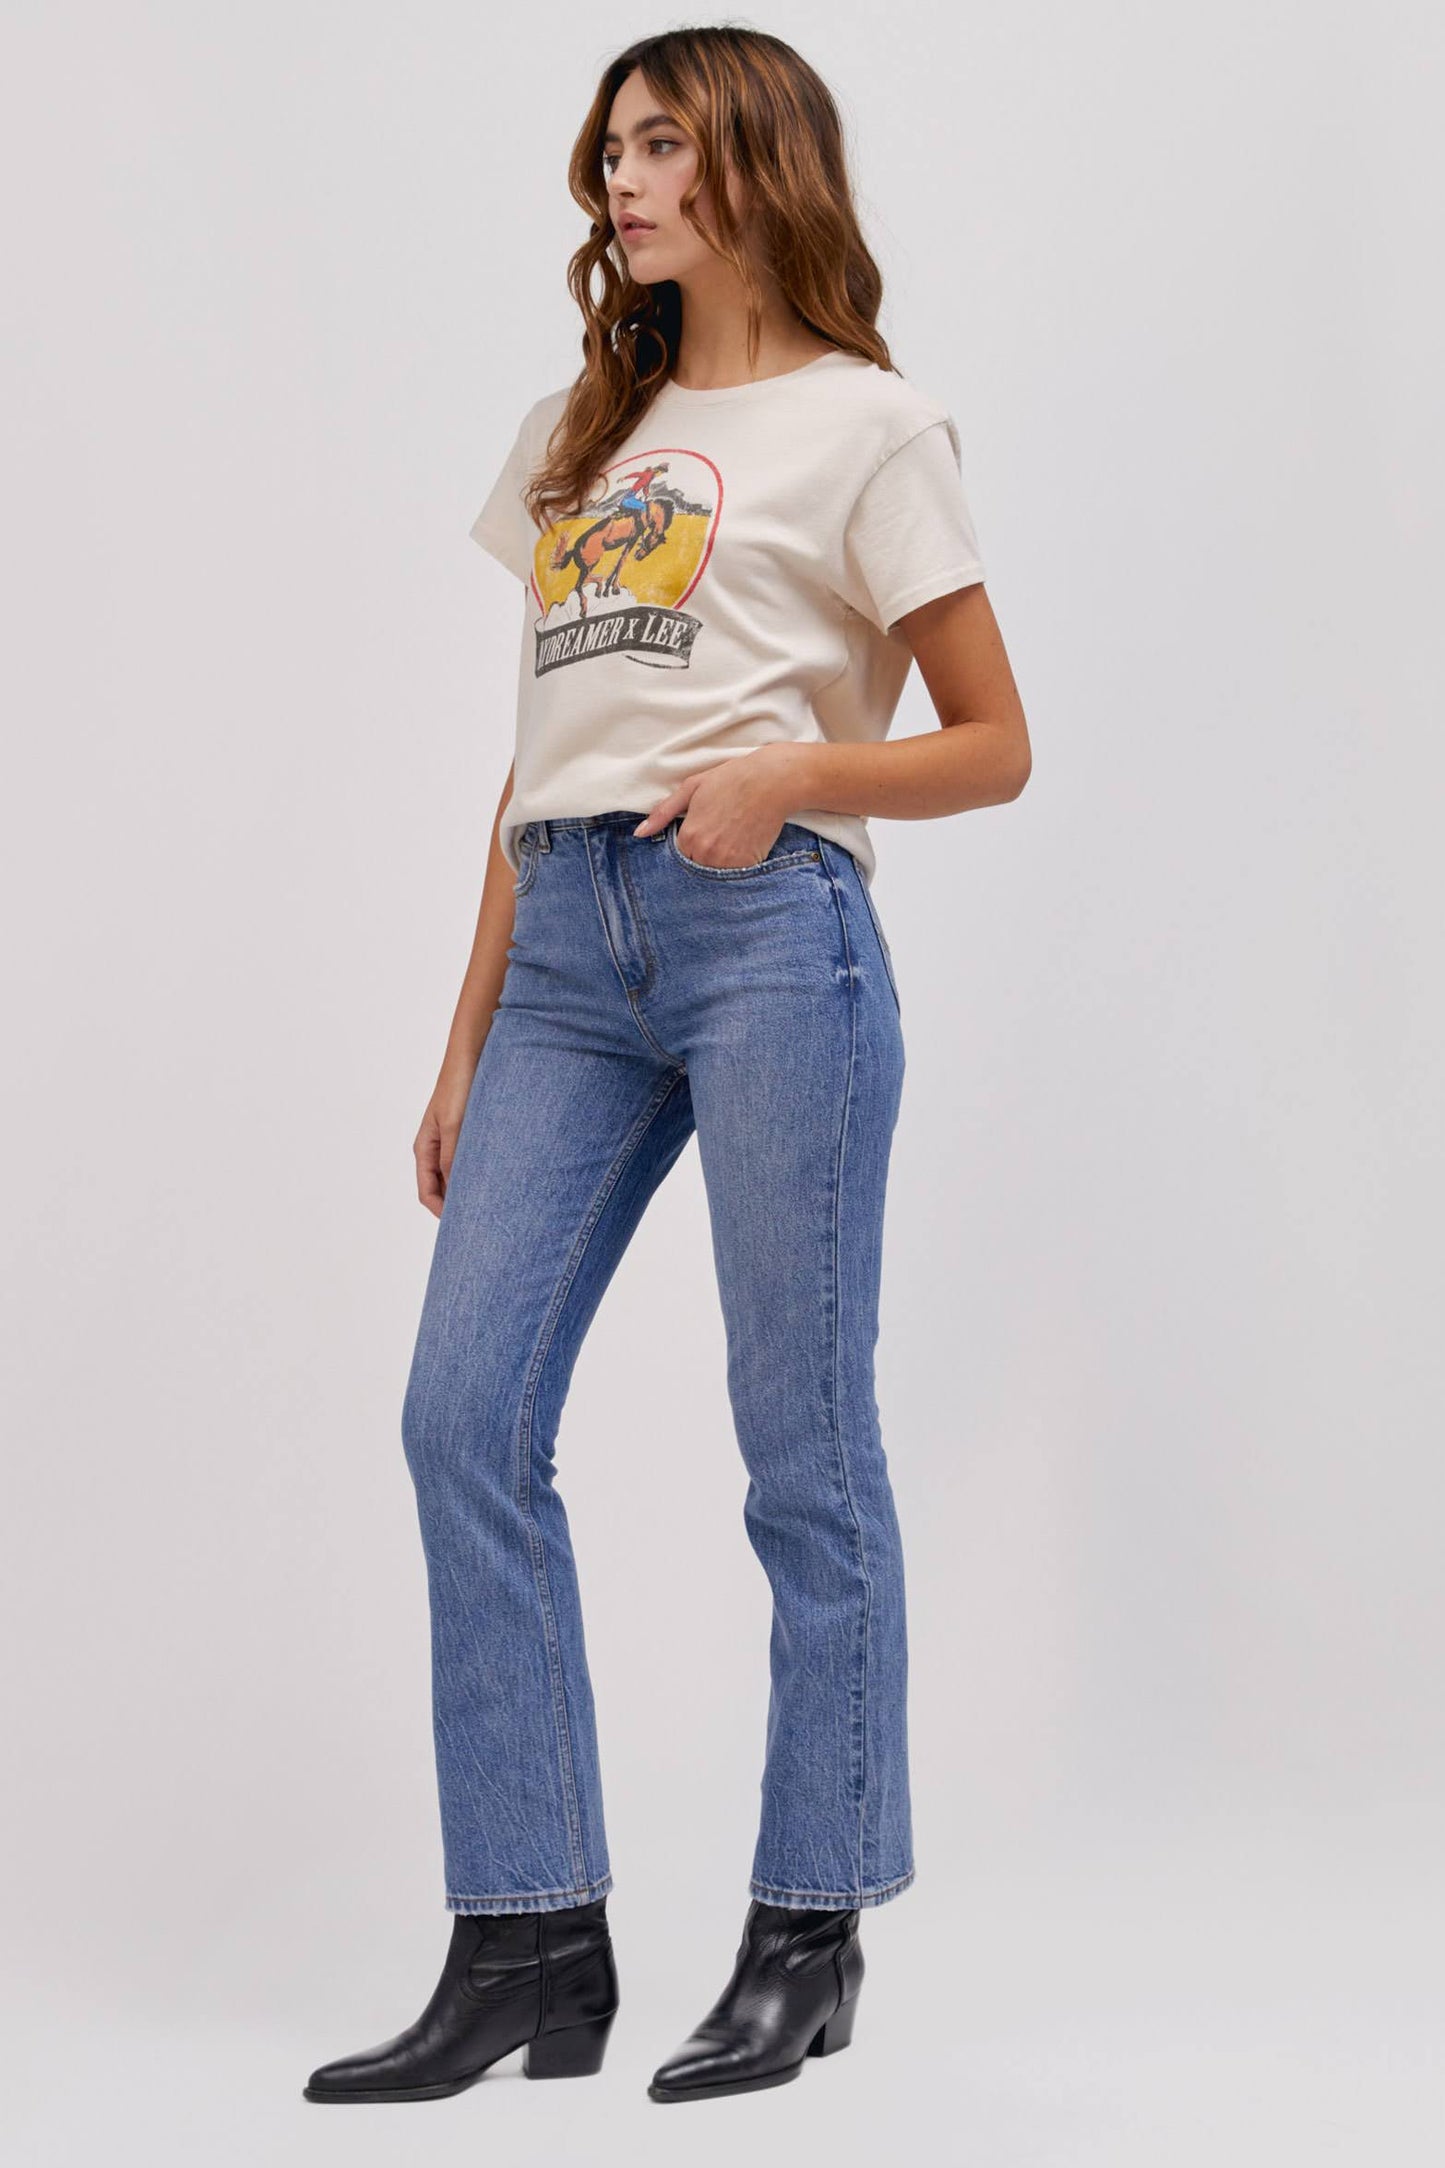 A curly-haired model featuring a white tour tee designed with a fresh rendition of a tried and true Lee vintage rodeo graphic hits a relaxed fit, Tour Tee.